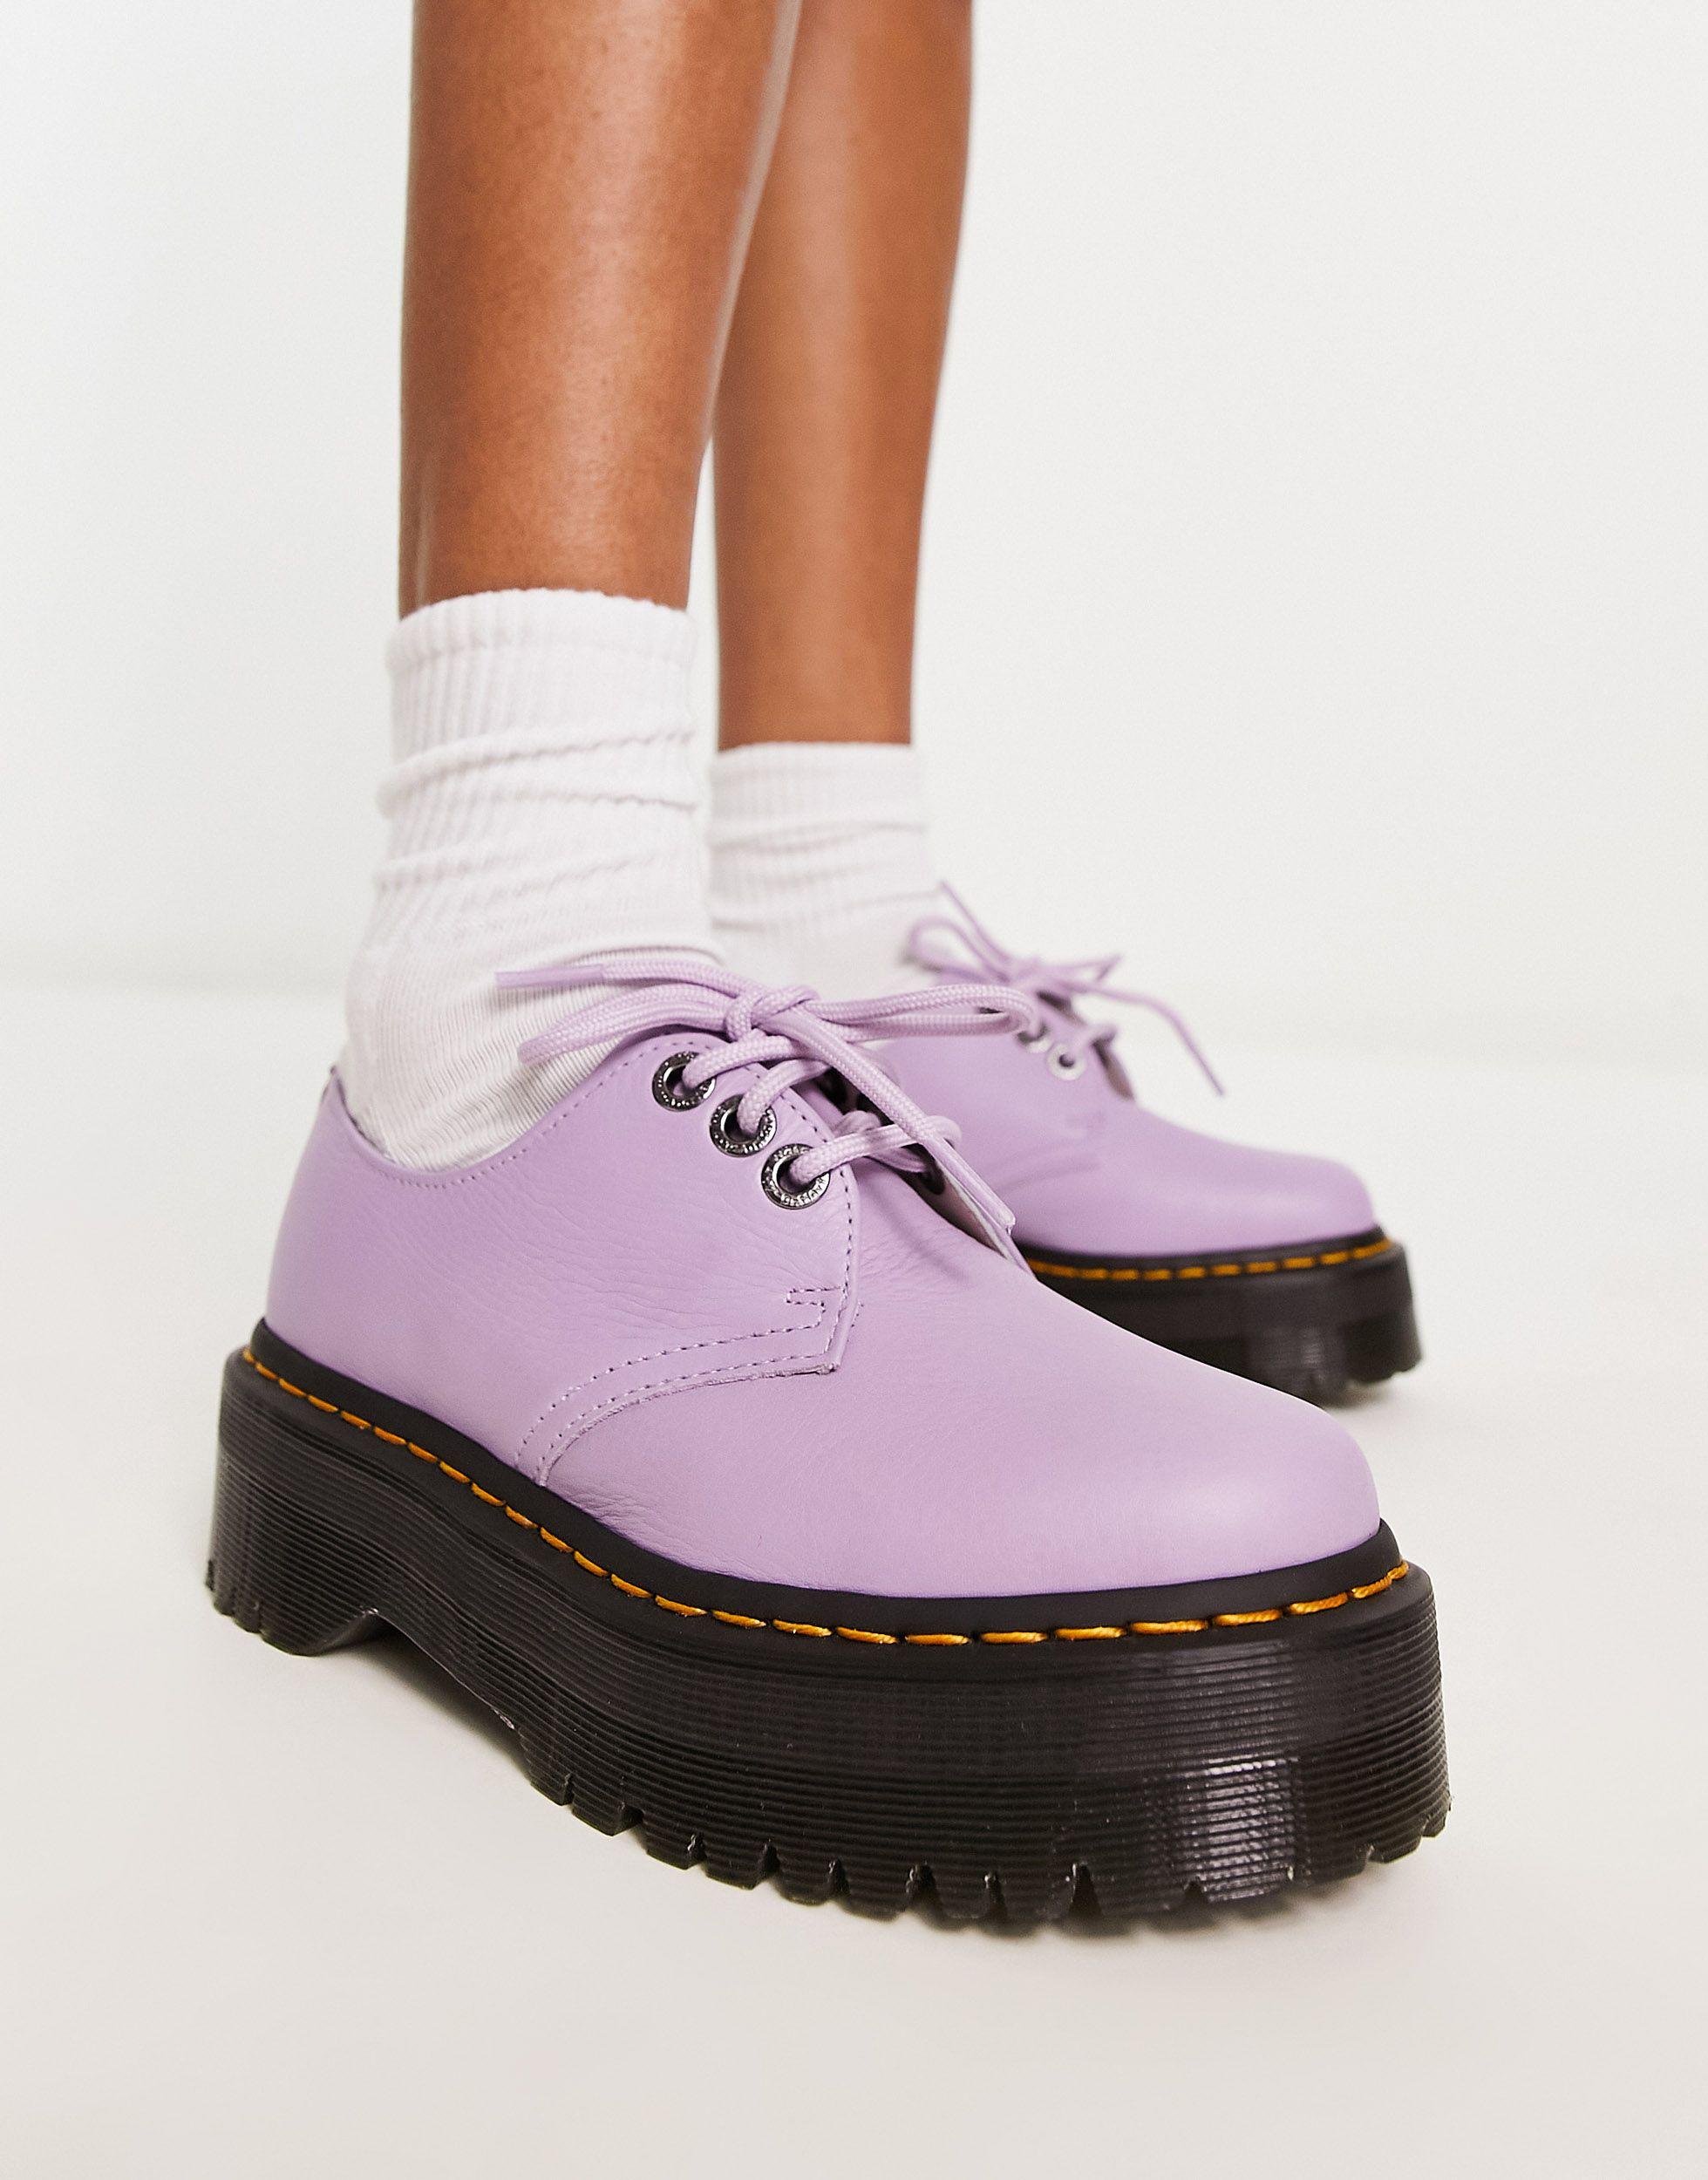 Dr. Martens 1461 Quad Ii Shoes in Purple | Lyst